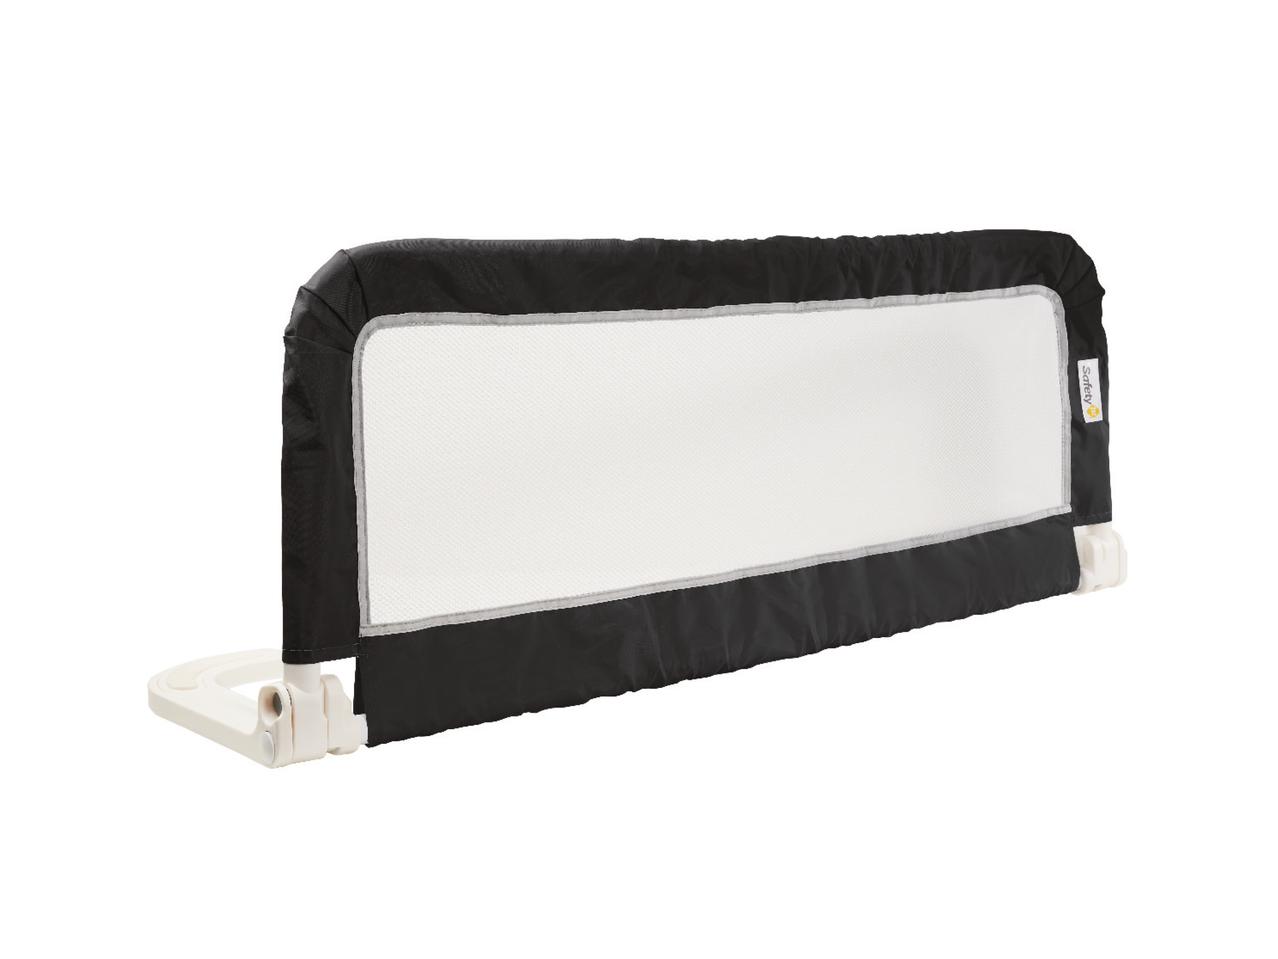 SAFETY 1ST(R) Portable Bed Rail